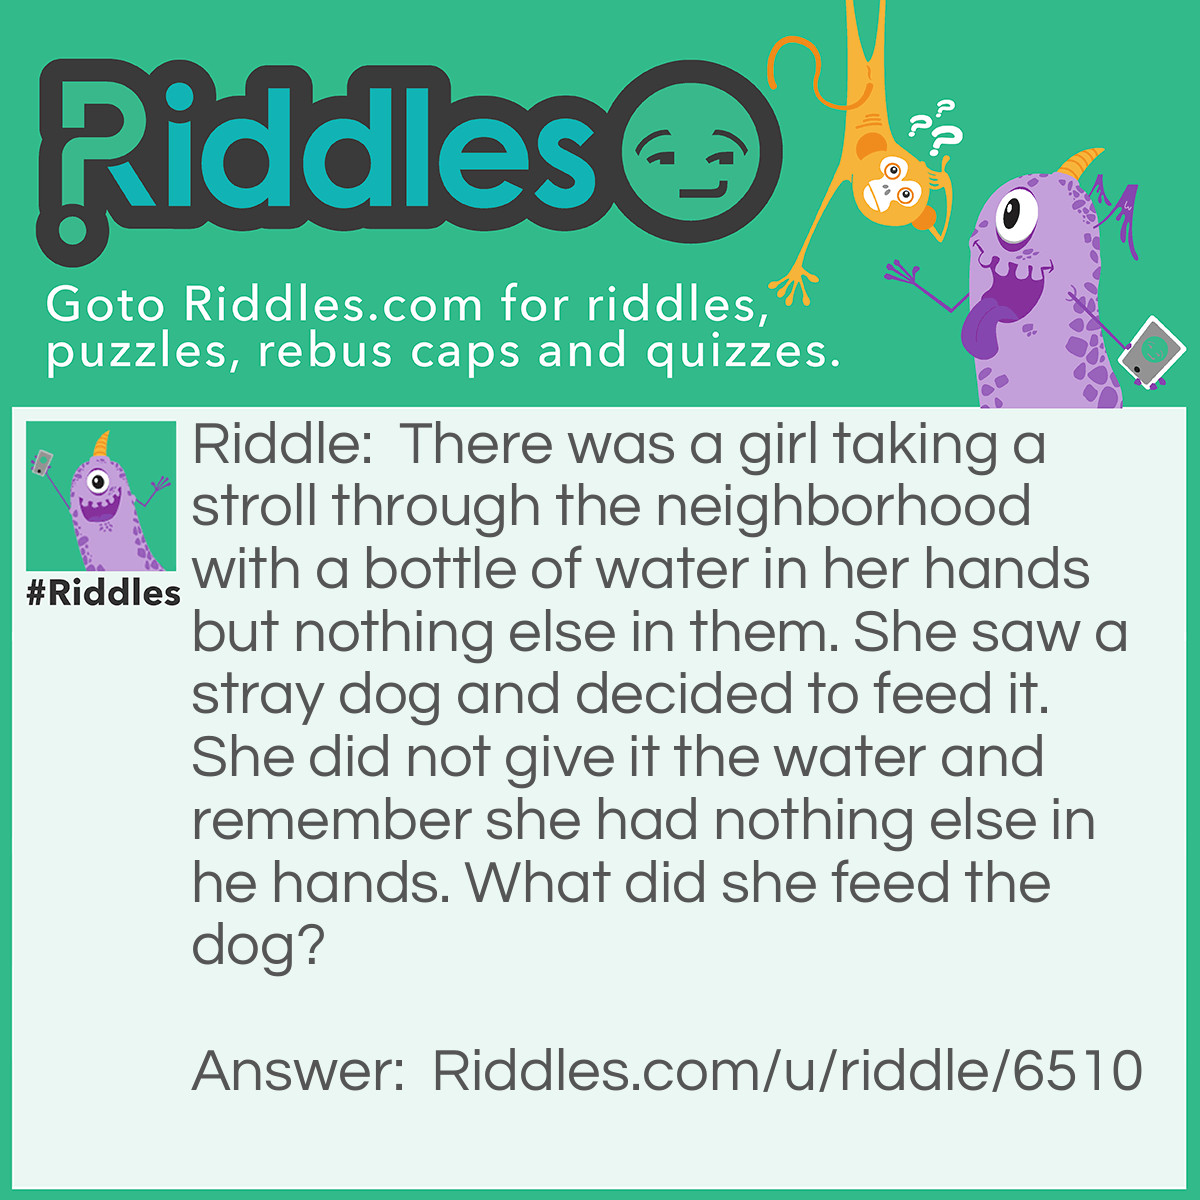 Riddle: There was a girl taking a stroll through the neighborhood with a bottle of water in her hands but nothing else in them. She saw a stray dog and decided to feed it. She did not give it the water and remember she had nothing else in he hands. What did she feed the dog? Answer: I said she had no food in her hands so she fed it with something in her pocket.